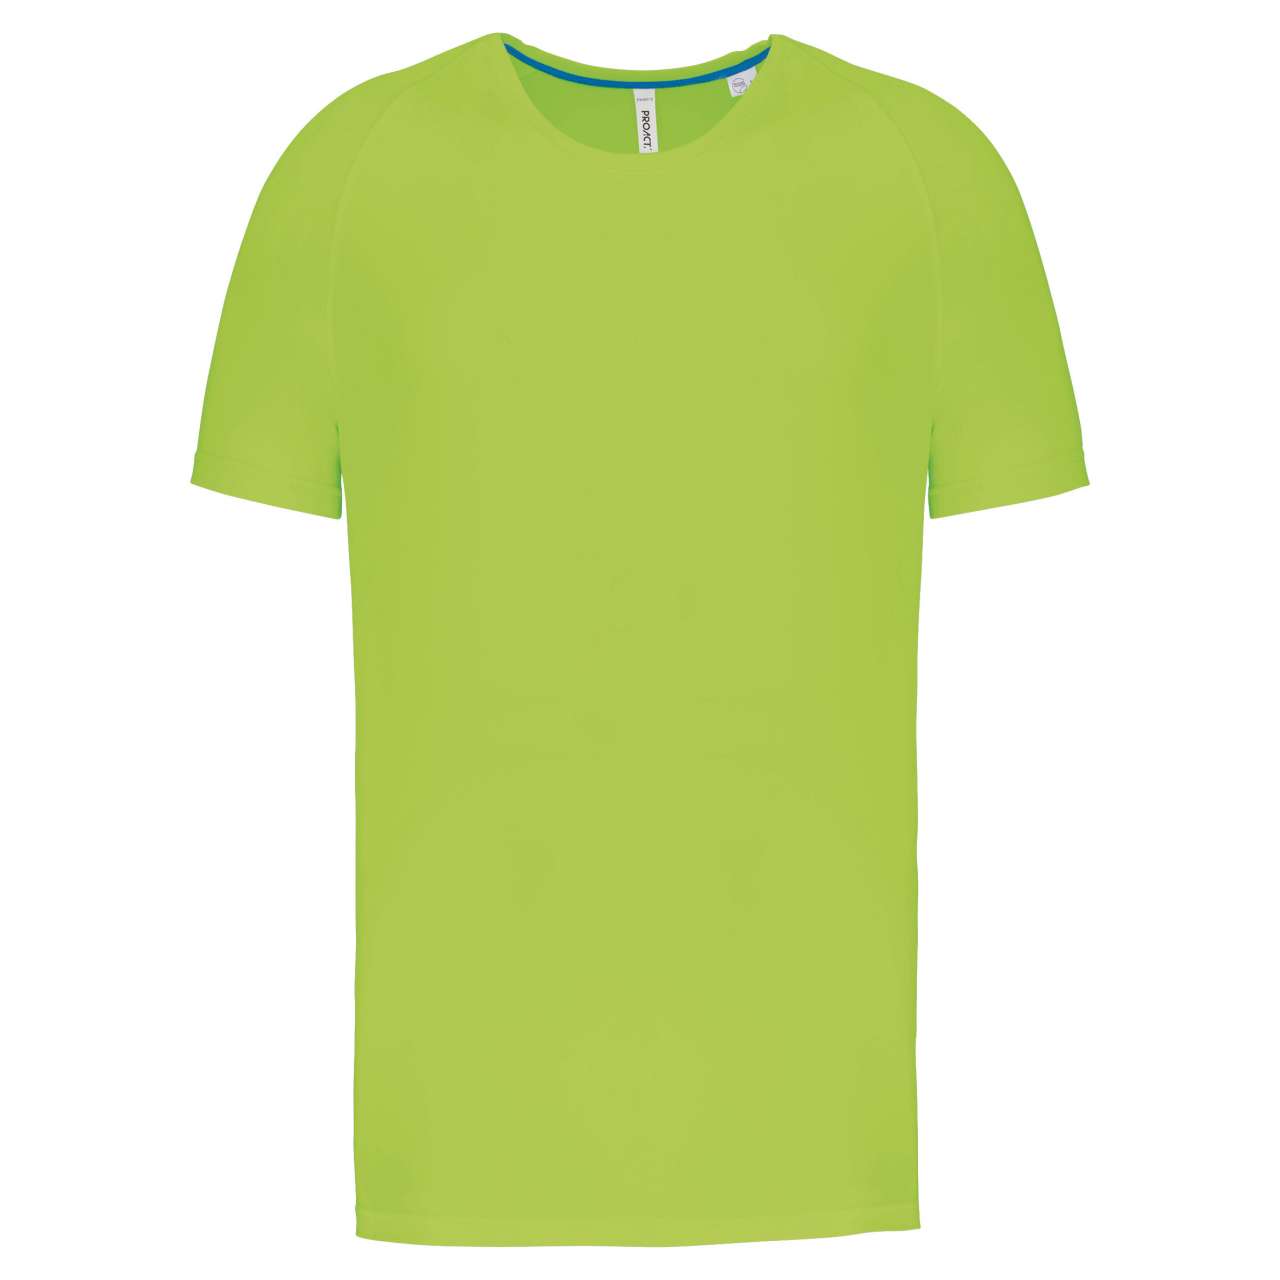 Promo  MEN'S RECYCLED ROUND NECK SPORTS T-SHIRT